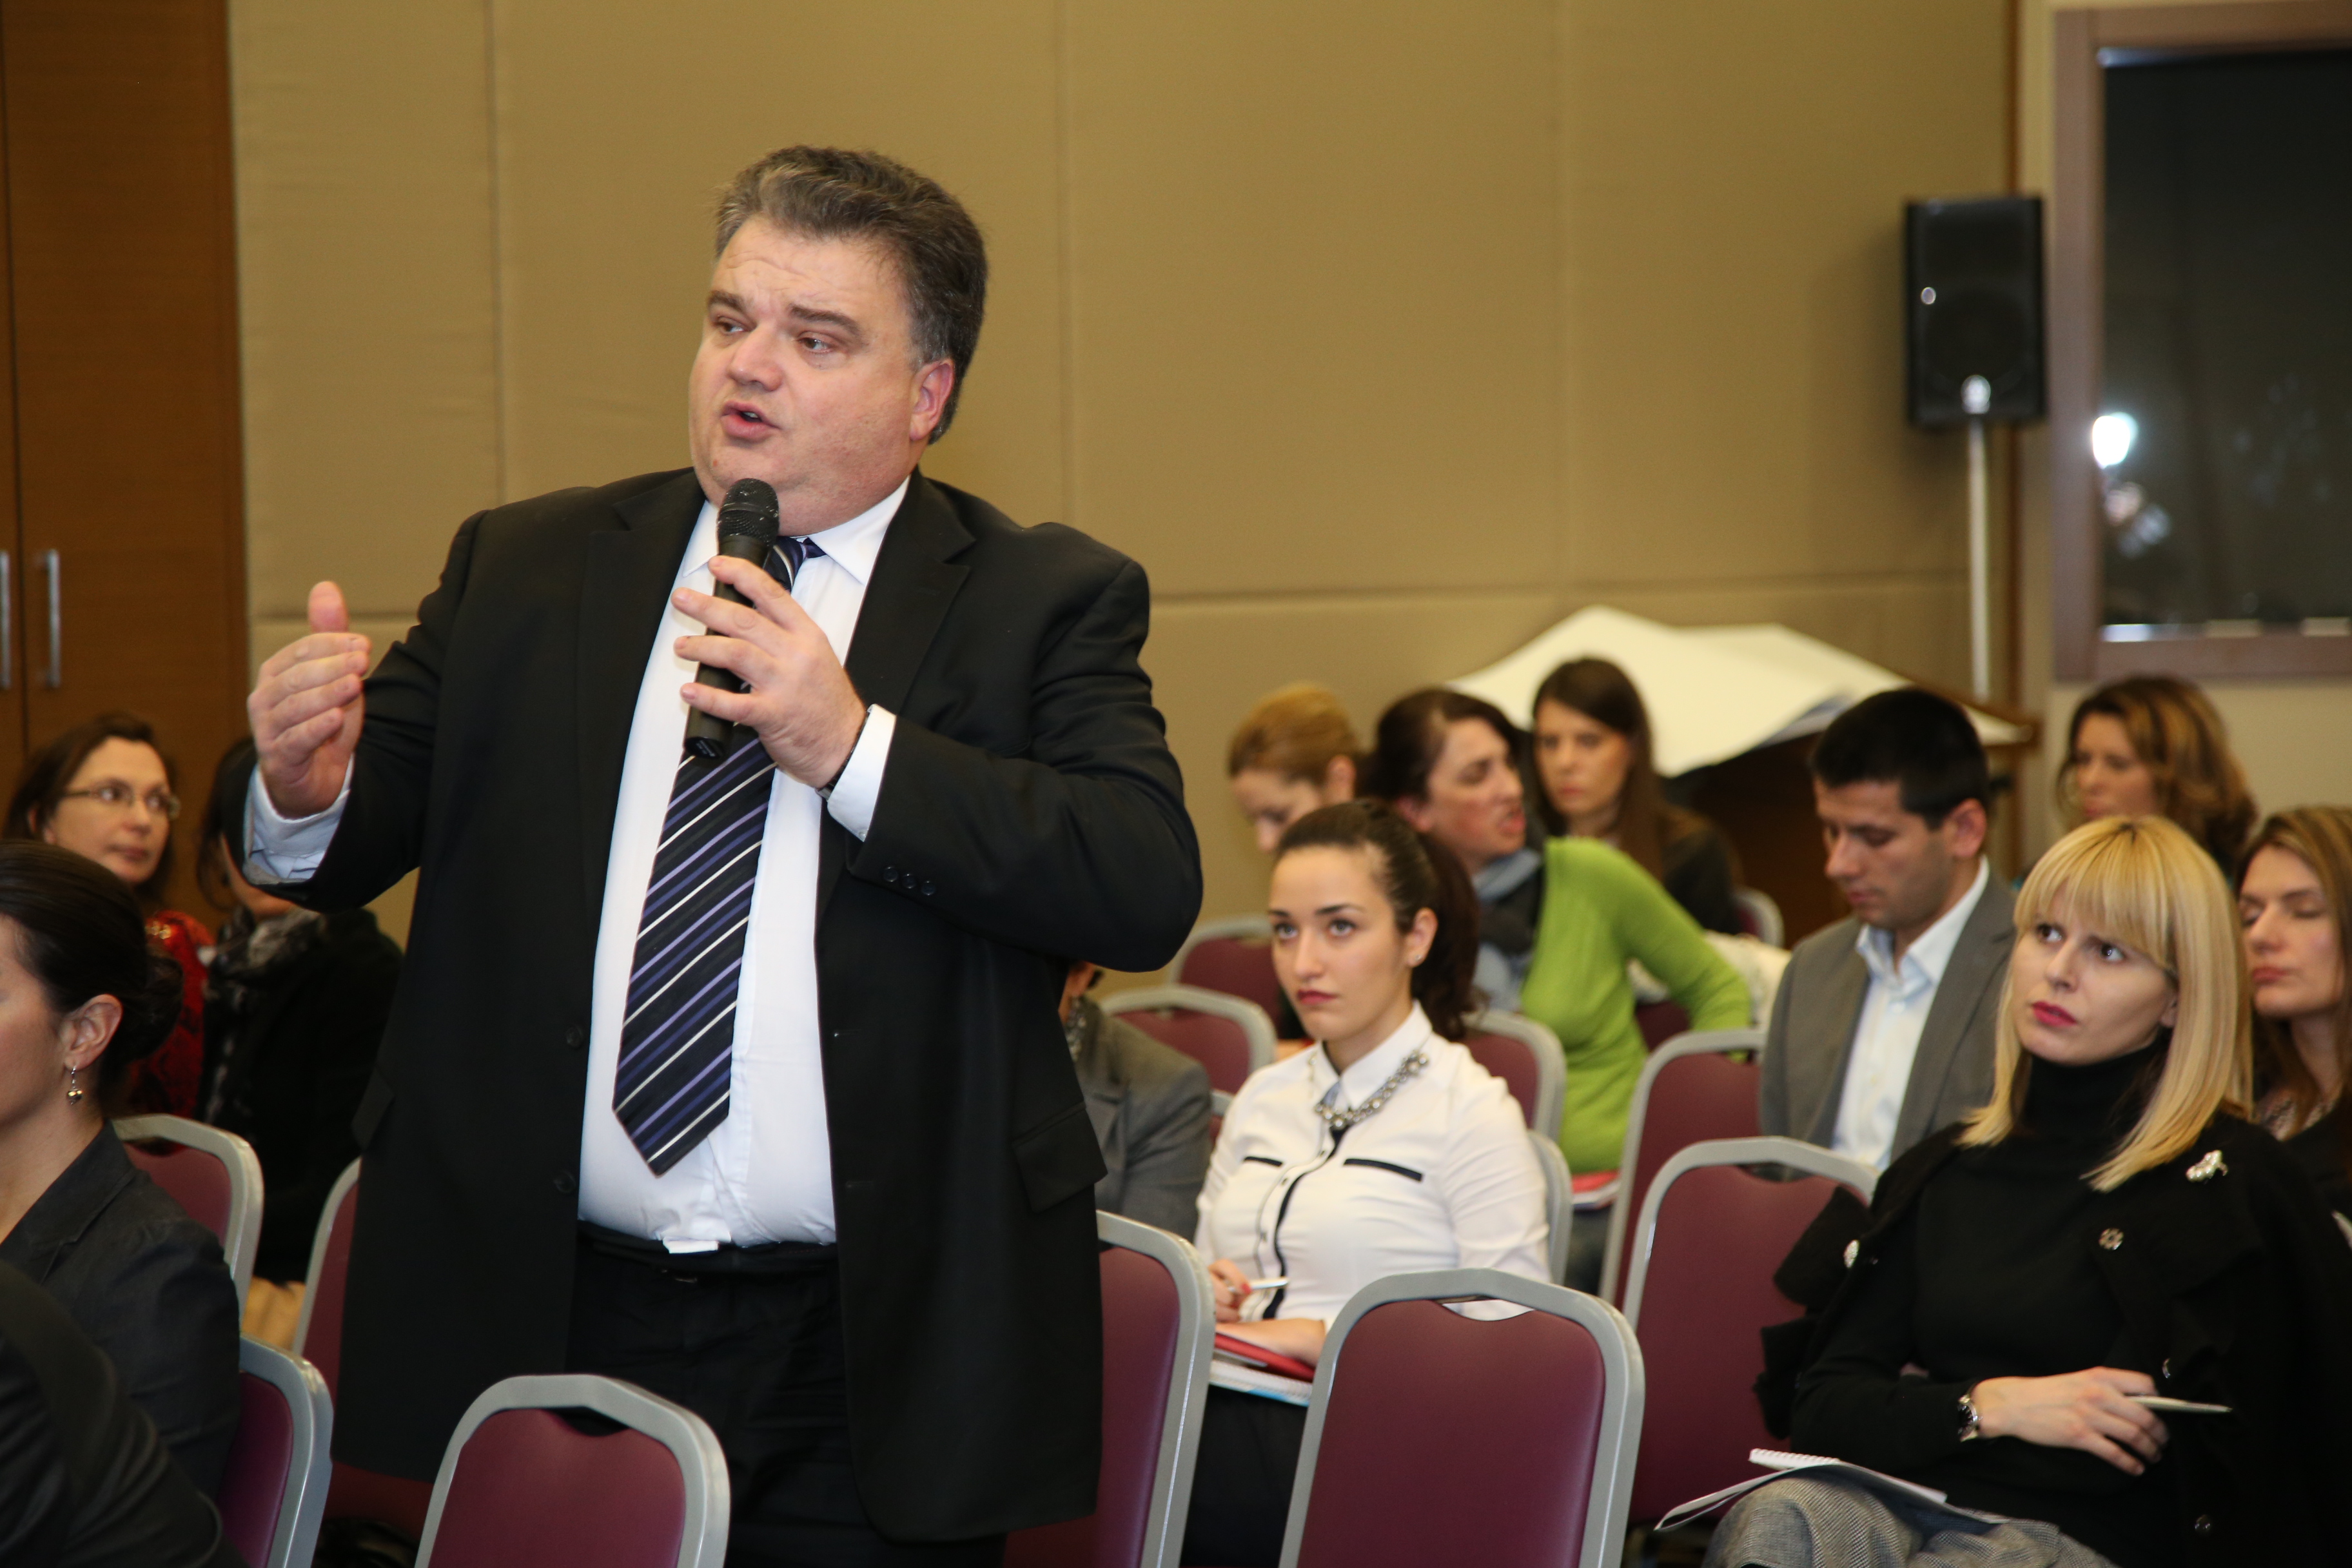 RCC roadshow on SEE 2020 strategy implementation, monitoring and promotion, in Podgorica, on 5 February 2015. (Photo RCC)